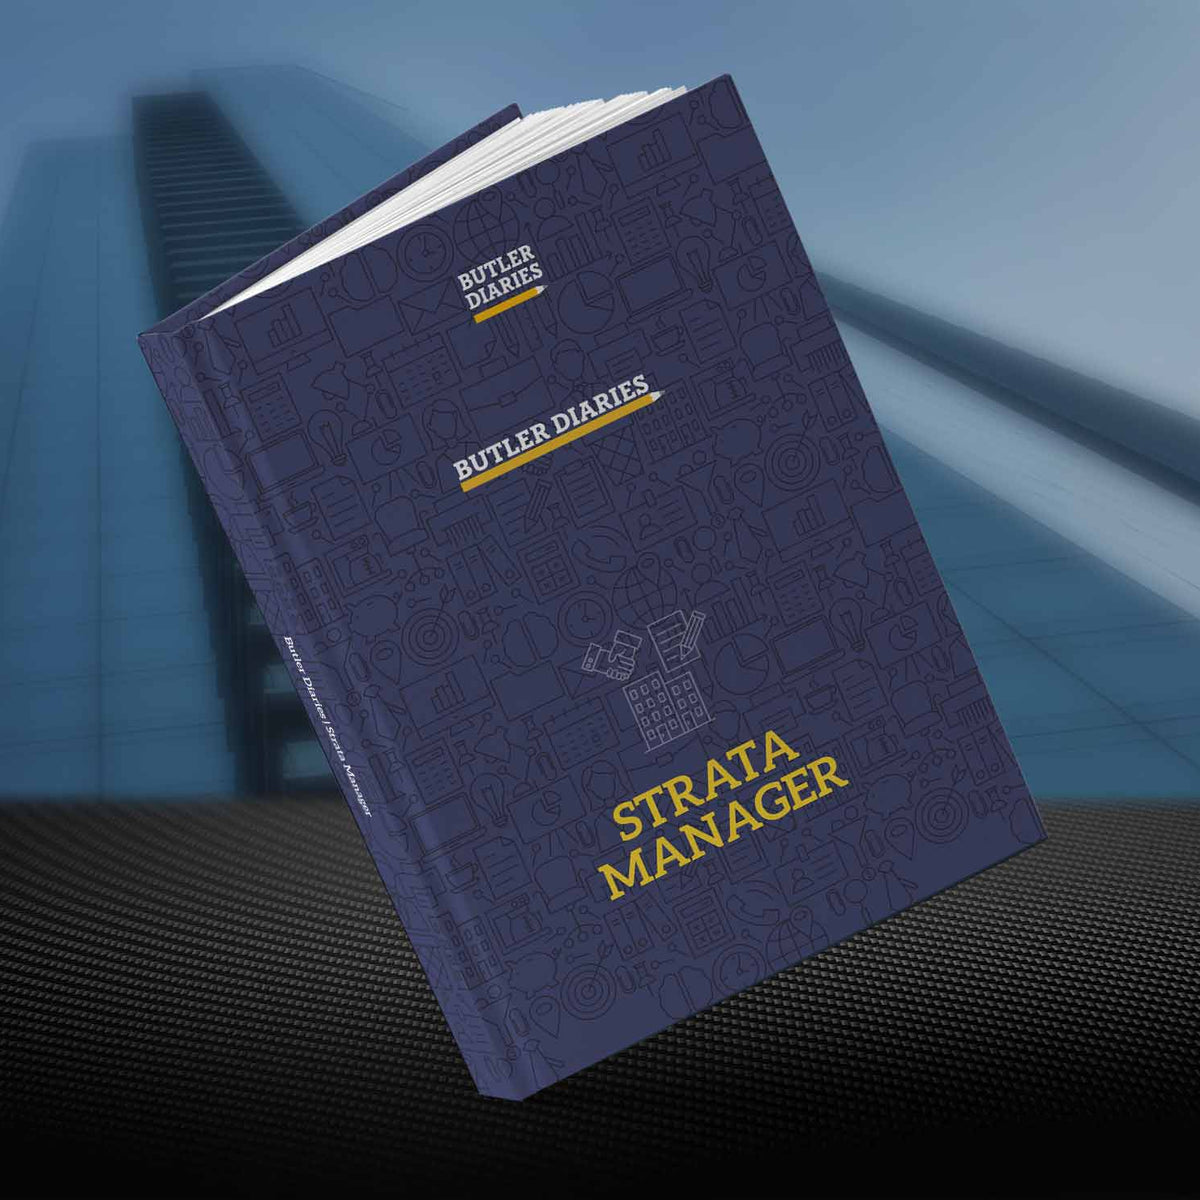 2023 Butler Professional Diaries: STRATA MANAGER - Butler Diaries